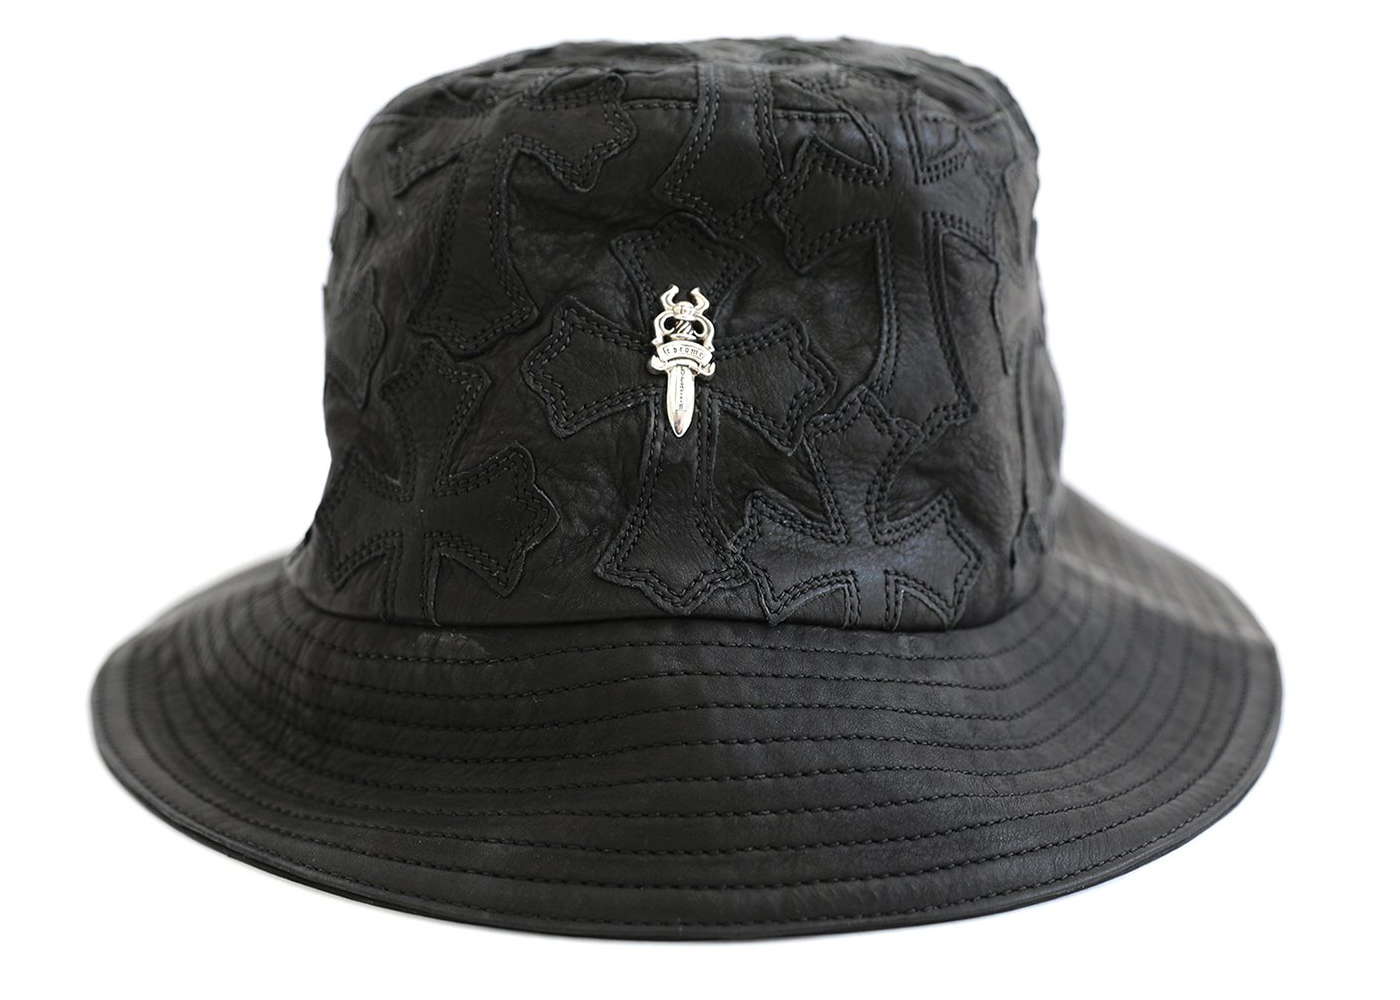 Chrome Hearts Cross Leather Patch Bucket Hat Black